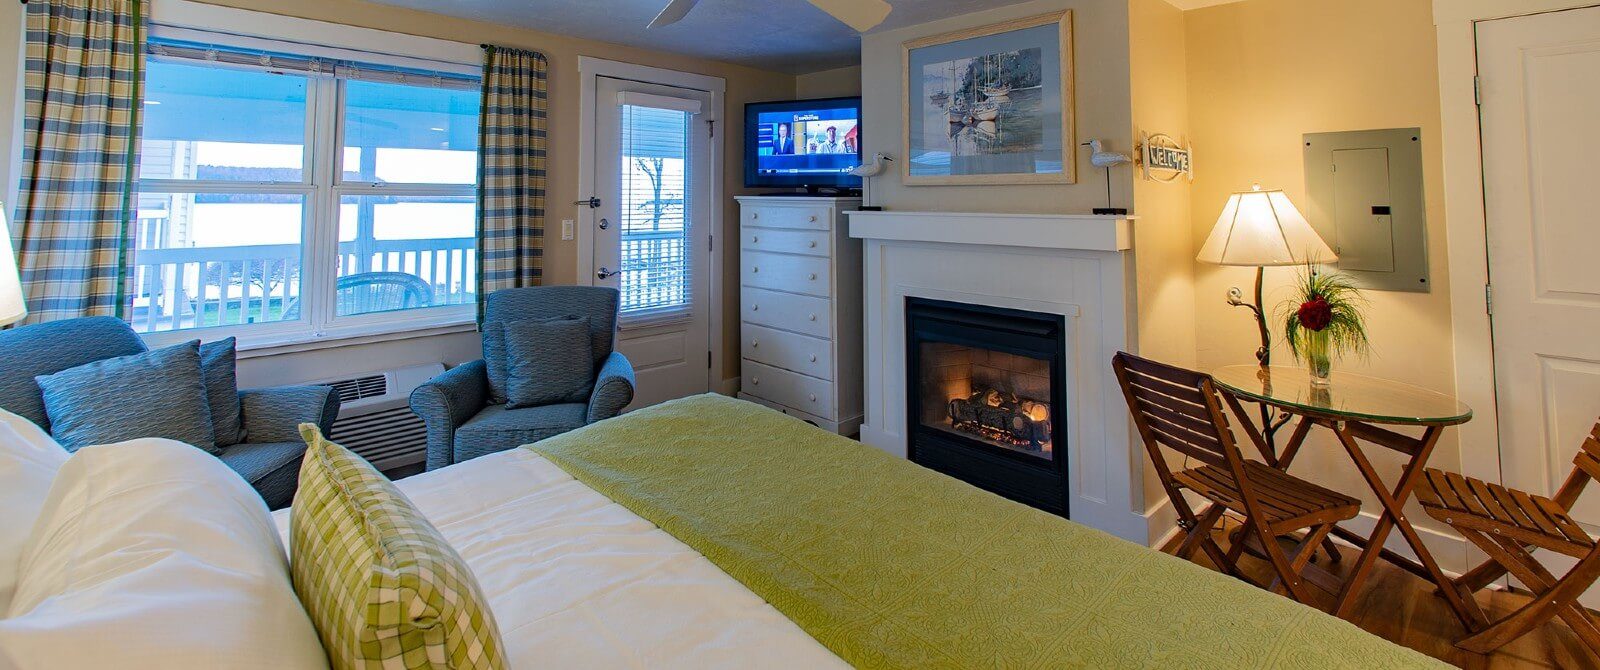 Bedroom with queen bed, sitting chairs, large windows with plaid curtains, gas fireplace and dresser with TV